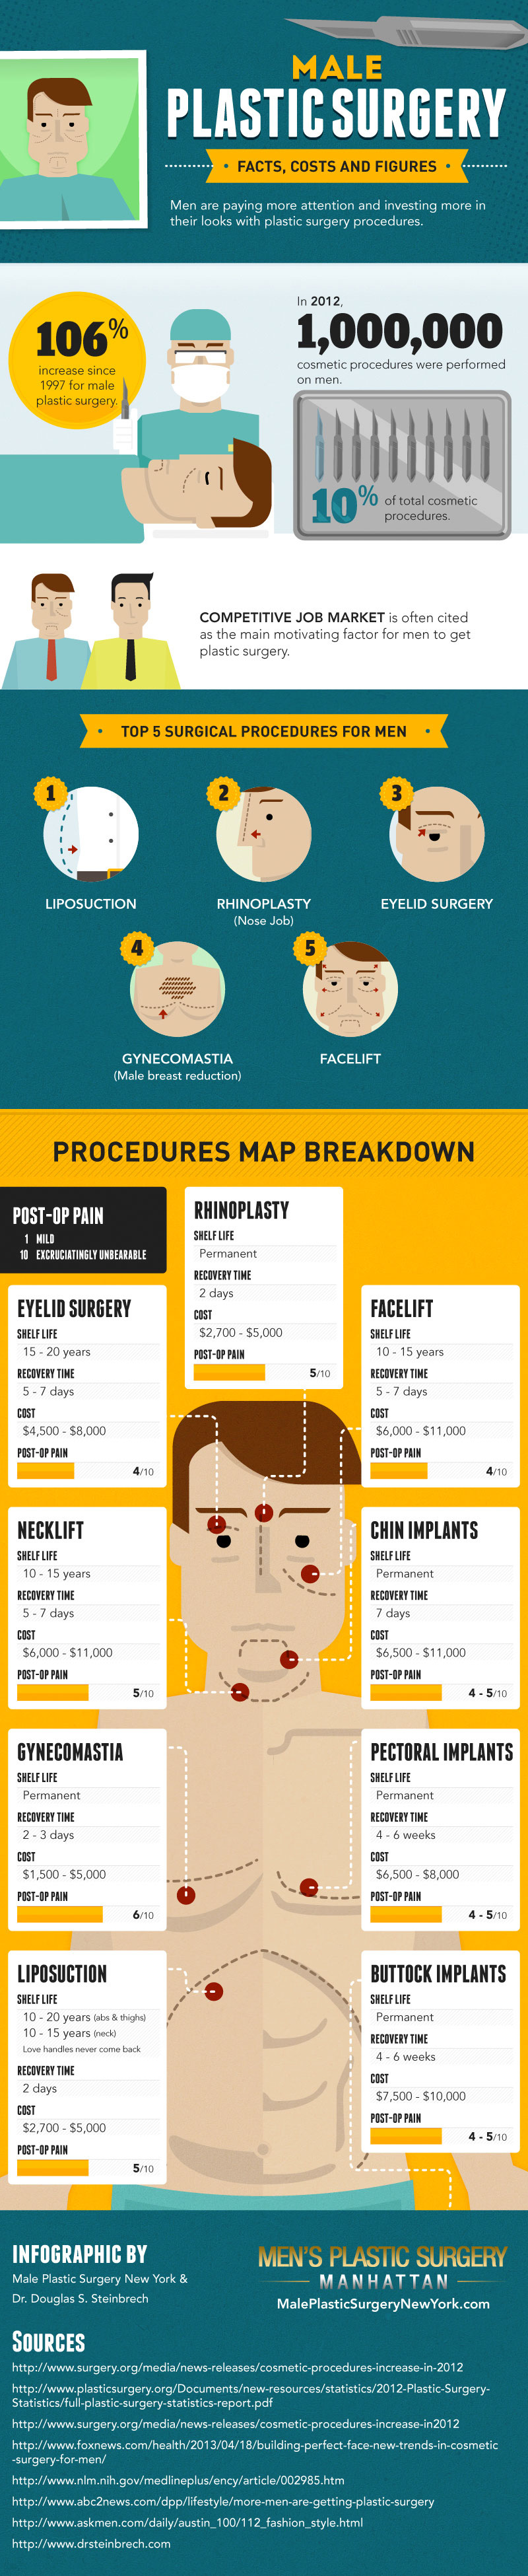 Male Plastic Surgery: Facts, Costs and Figures Infographic